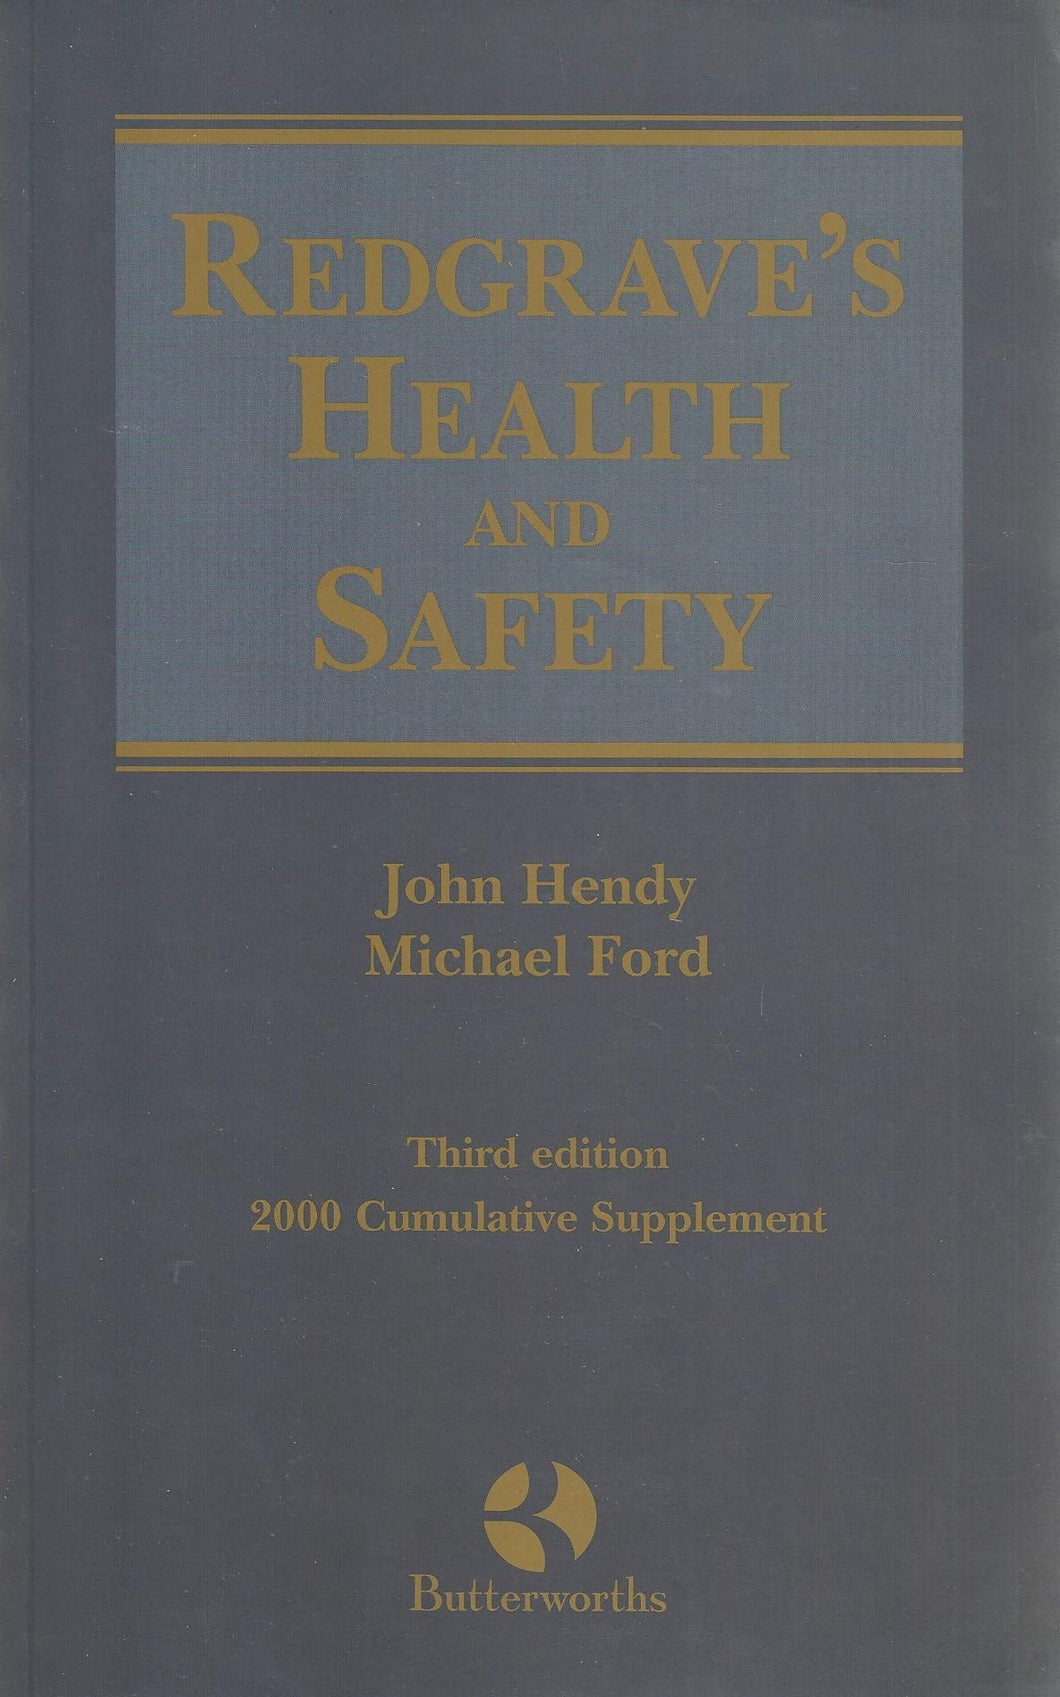 Redgrave's Health and Safety: Third Edition, 2000 Cumulative Supplement